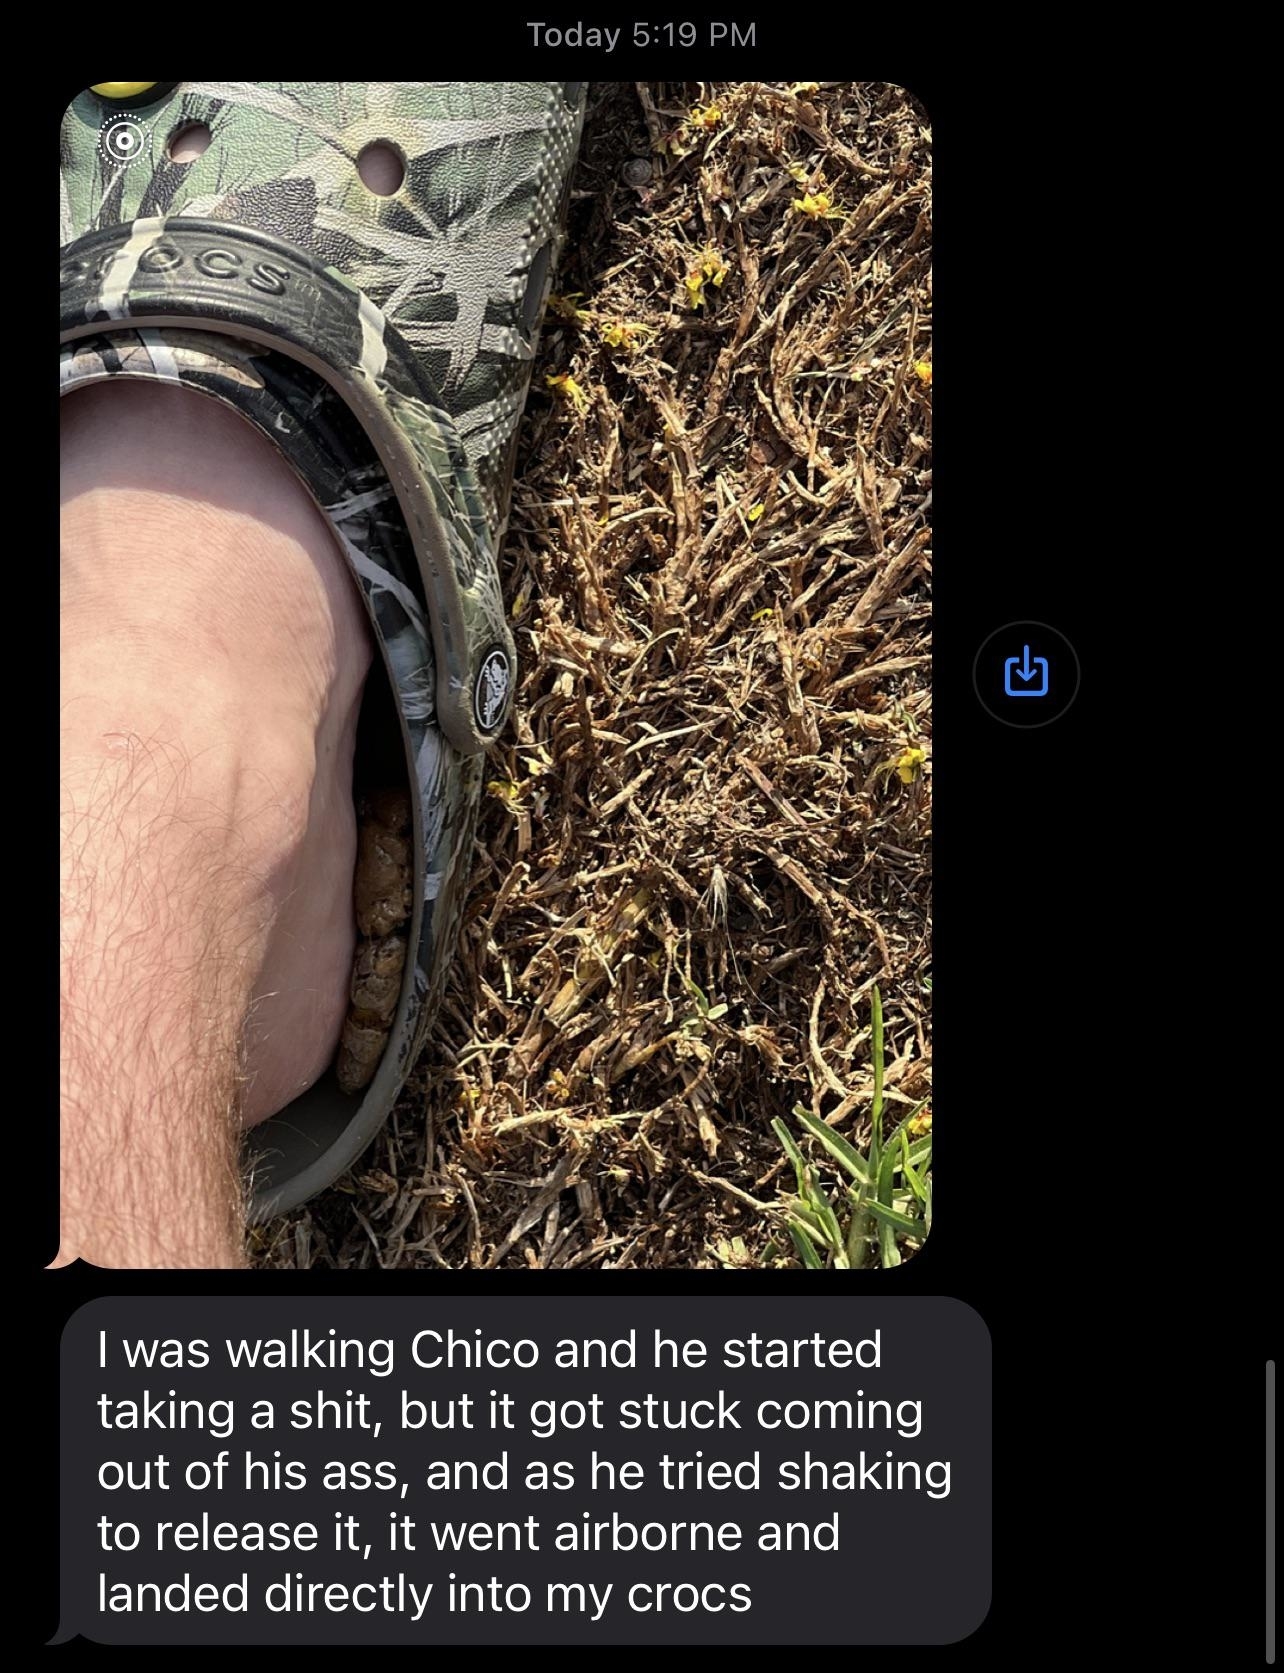 Close-up of a foot wearing a Crocs shoe on the ground, with caption, &quot;I was walking Chico and he started taking a shit, but it got stuck coming out of his ass, and as he tried shaking to release it, it went airborne and landed directly into my crocs&quot;